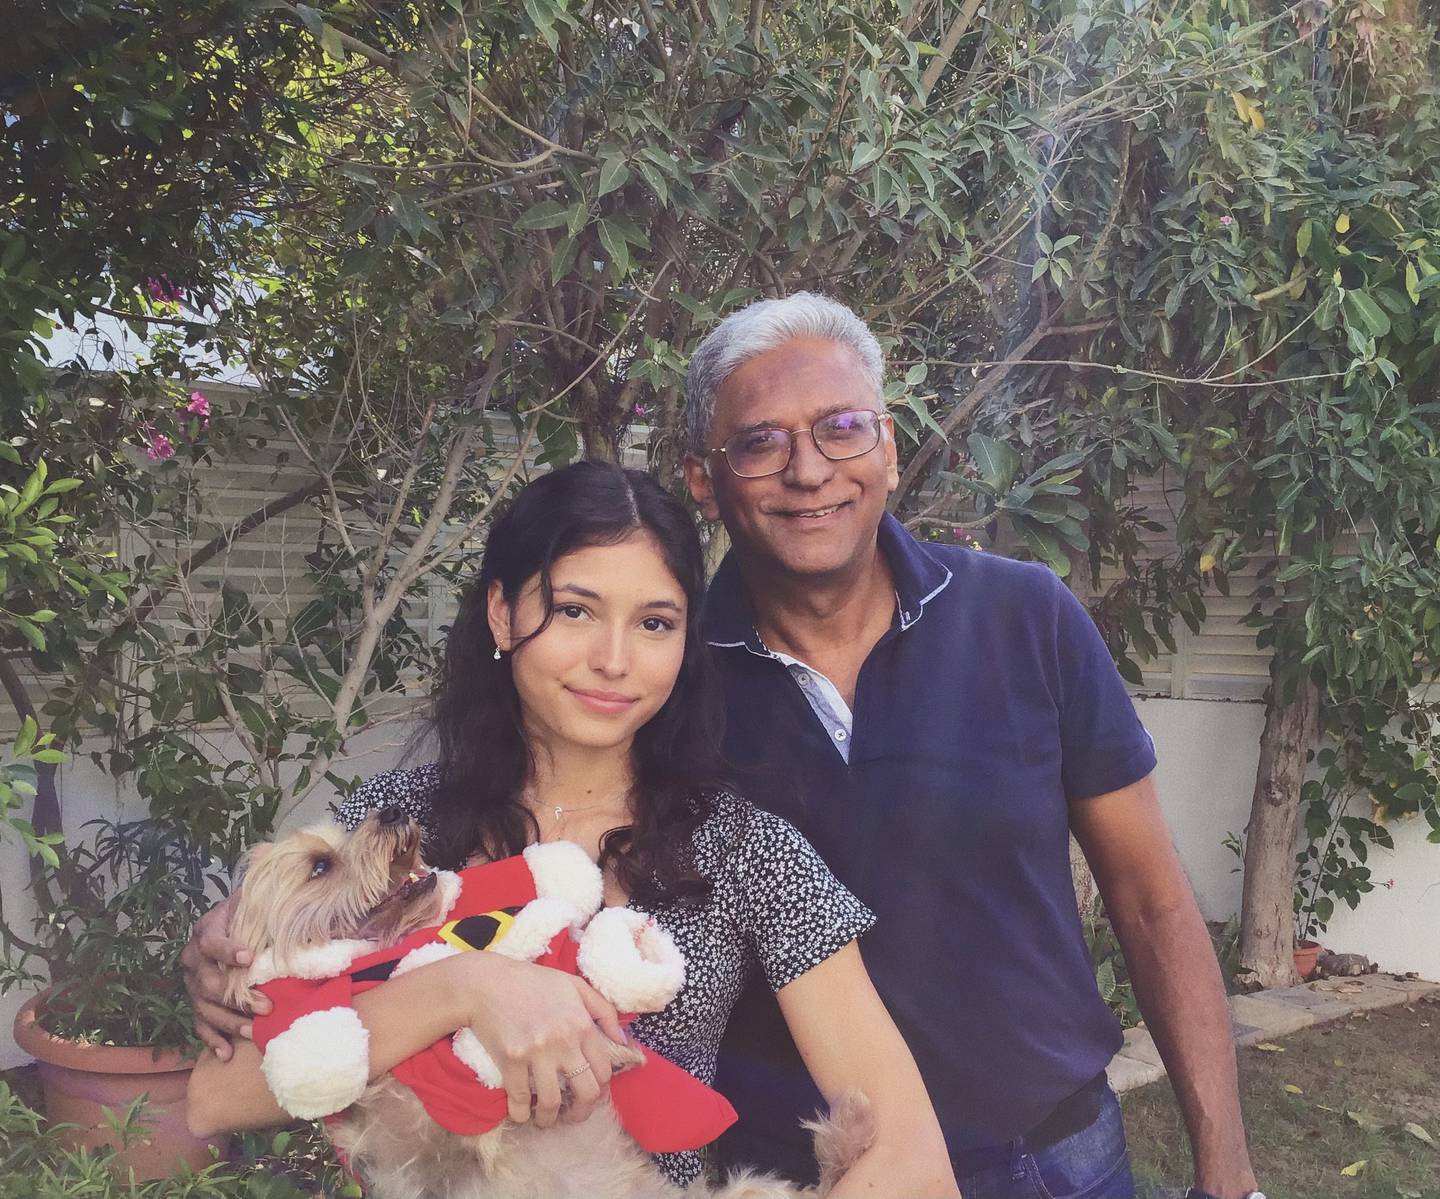 Melina Aggarwal with her father in Dubai during Christmas 2020. Photo: Melina Aggarwal